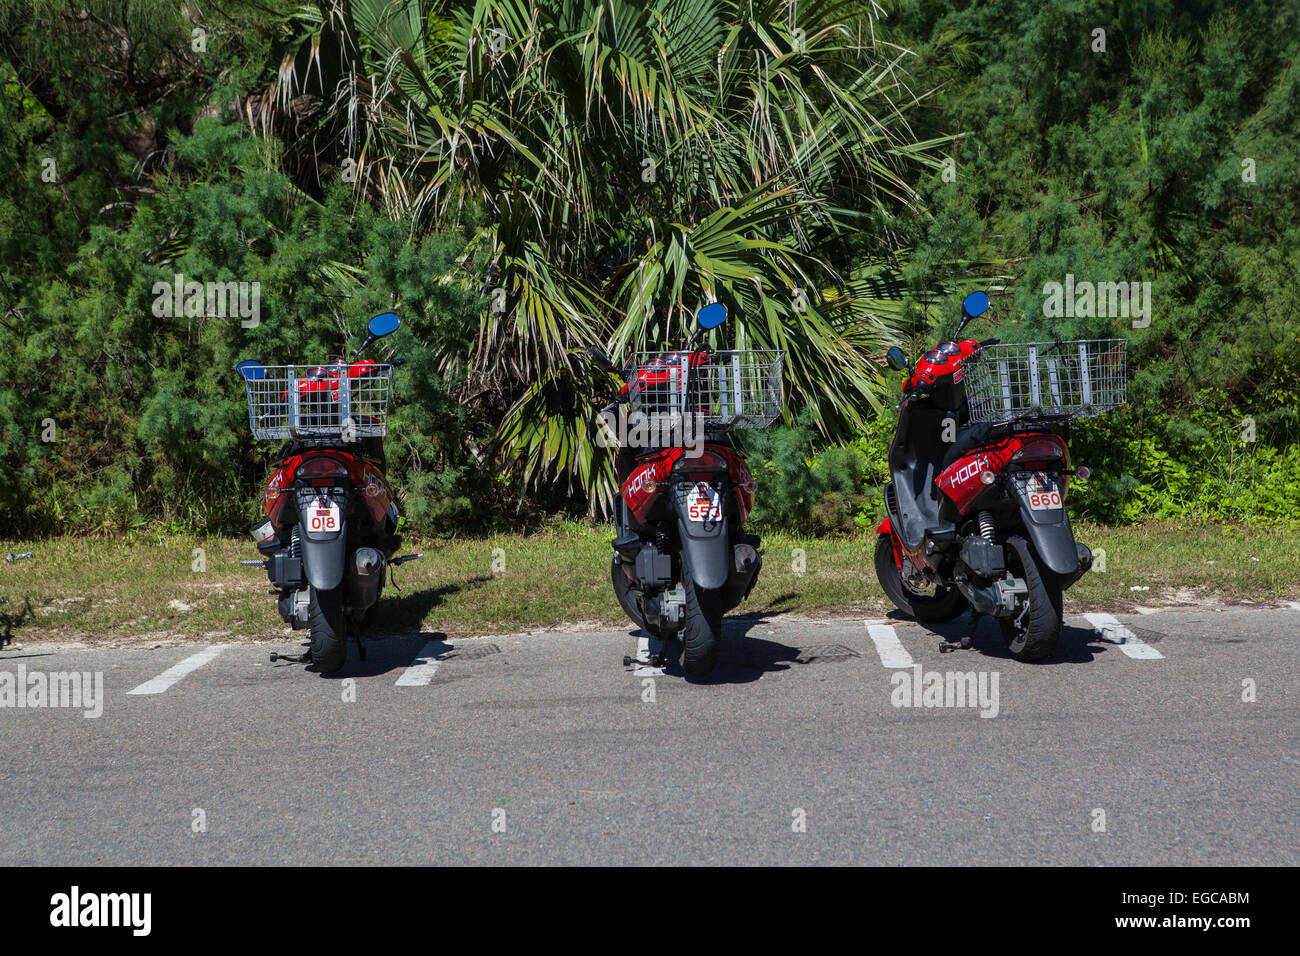 Rental Scooters Parked in Bermuda Stock Photo